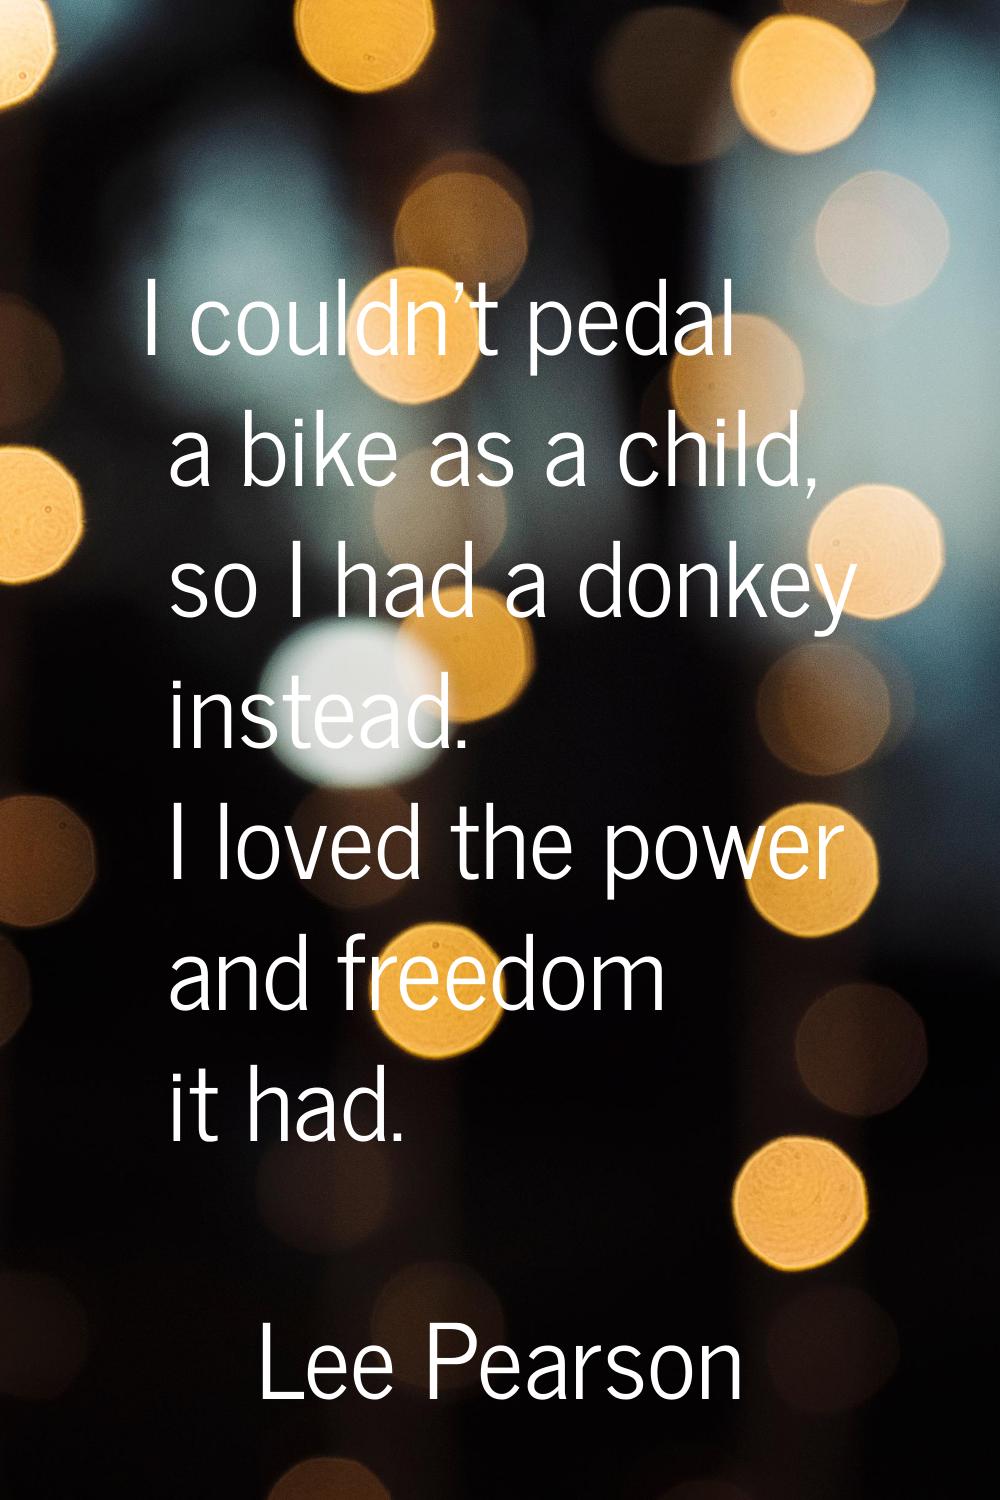 I couldn't pedal a bike as a child, so I had a donkey instead. I loved the power and freedom it had